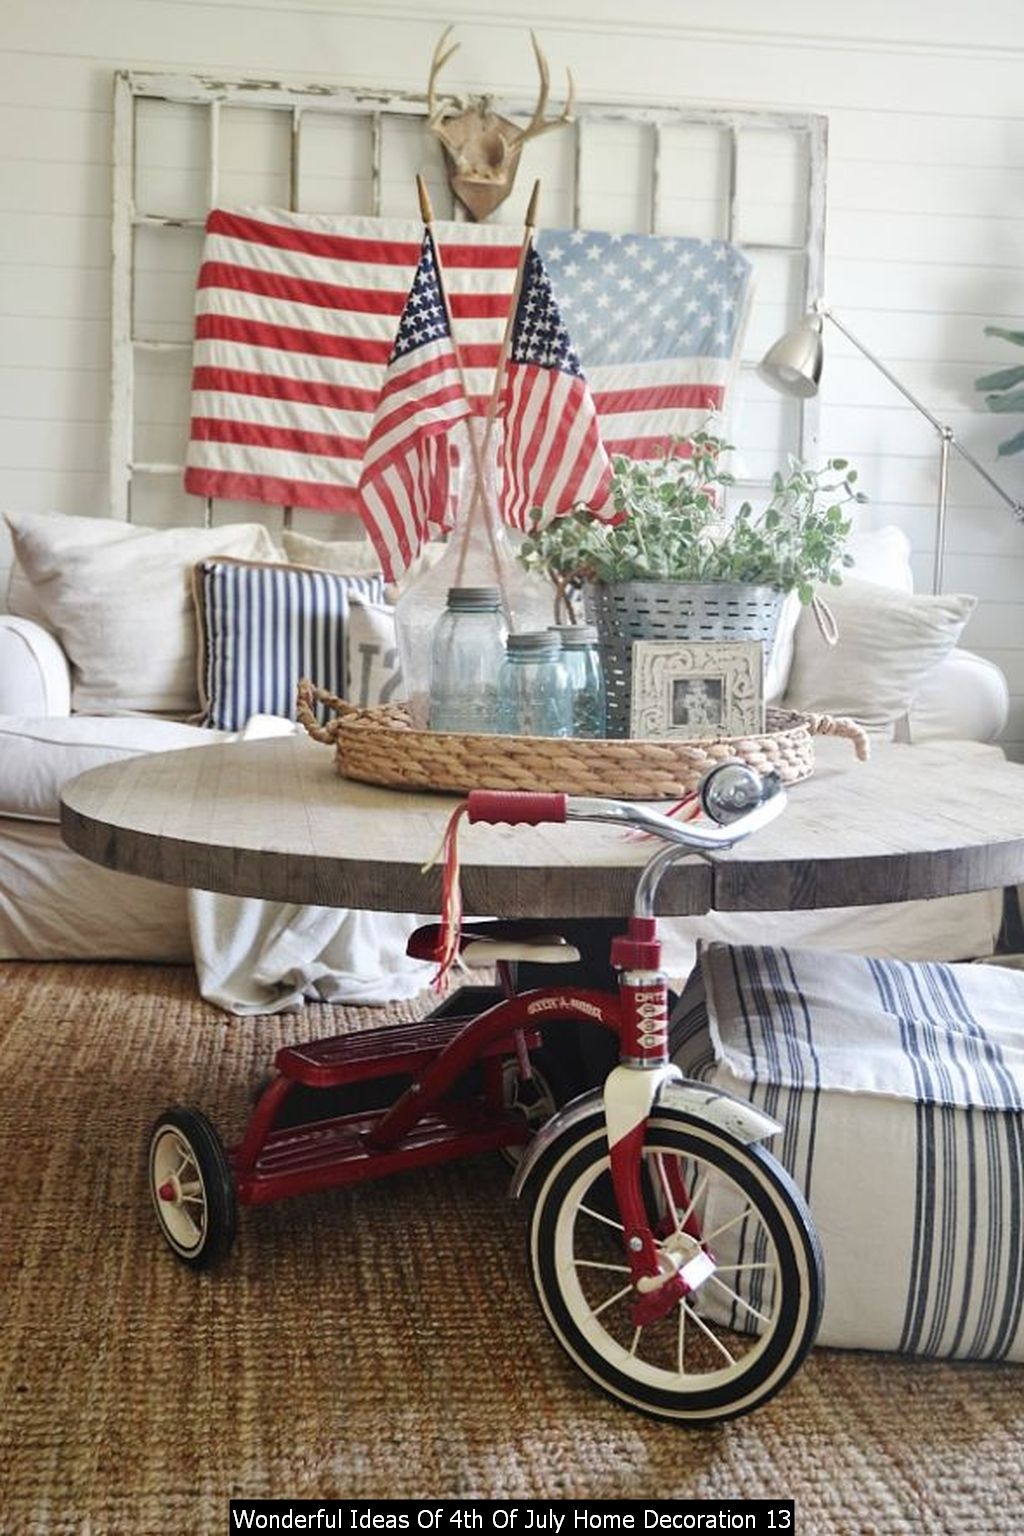 Wonderful Ideas Of 4th Of July Home Decoration 13